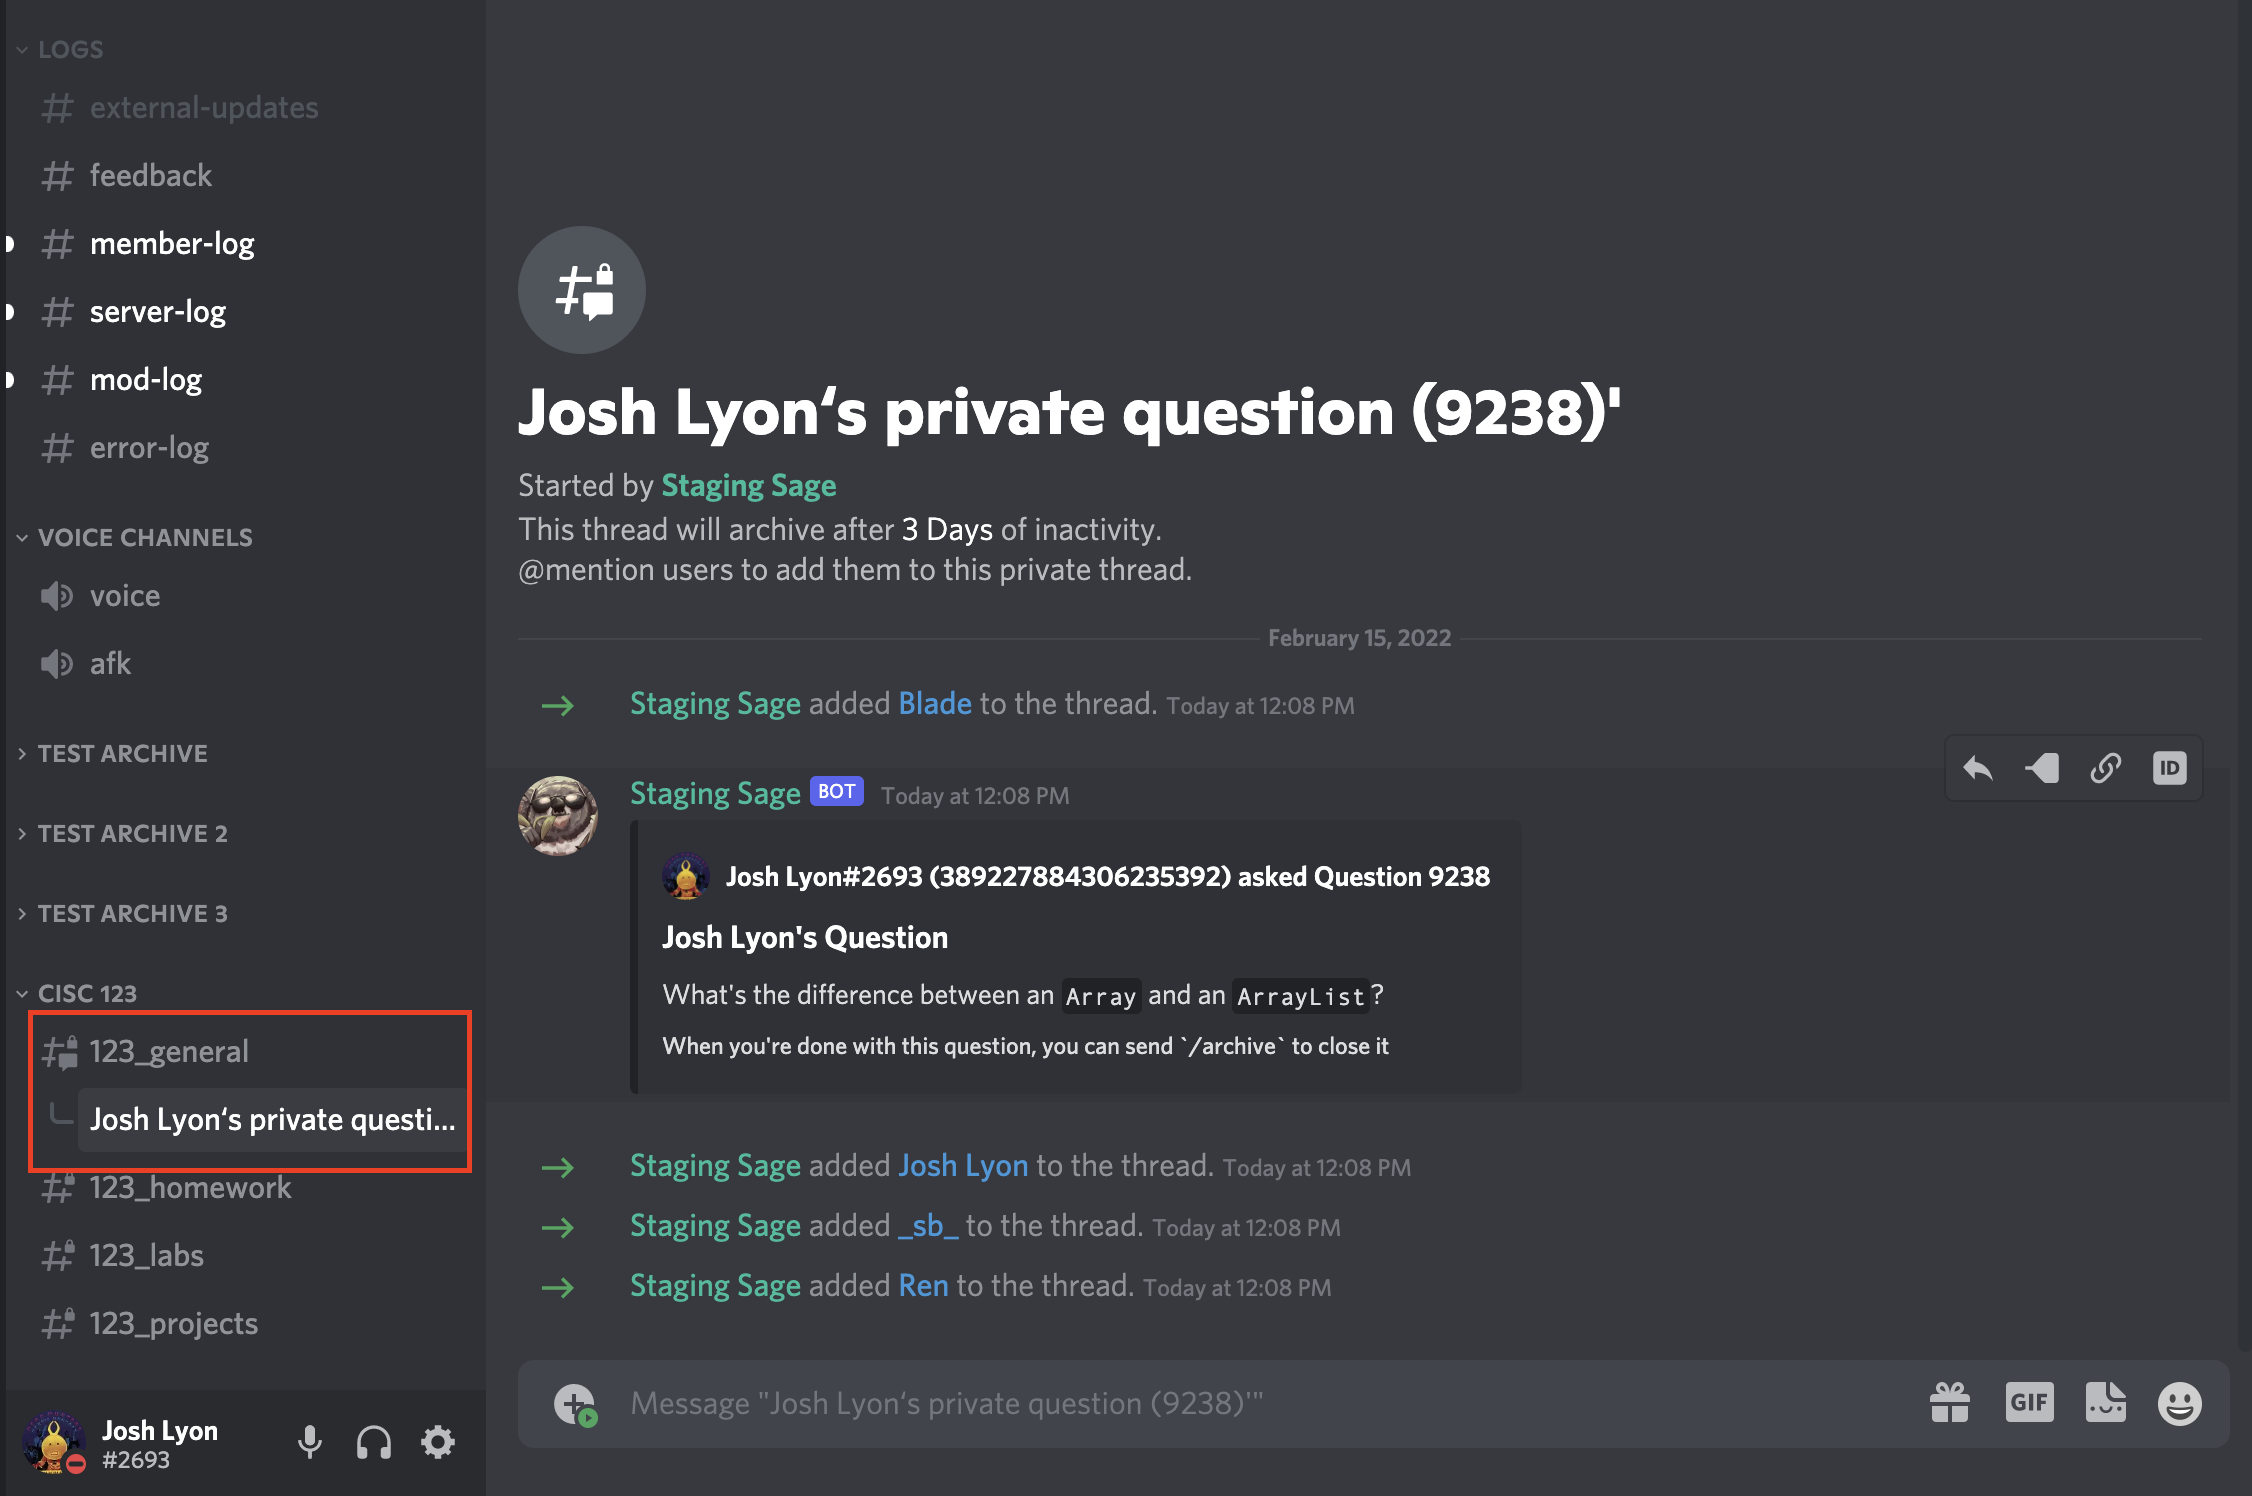 A private thread opened by Josh Lyon